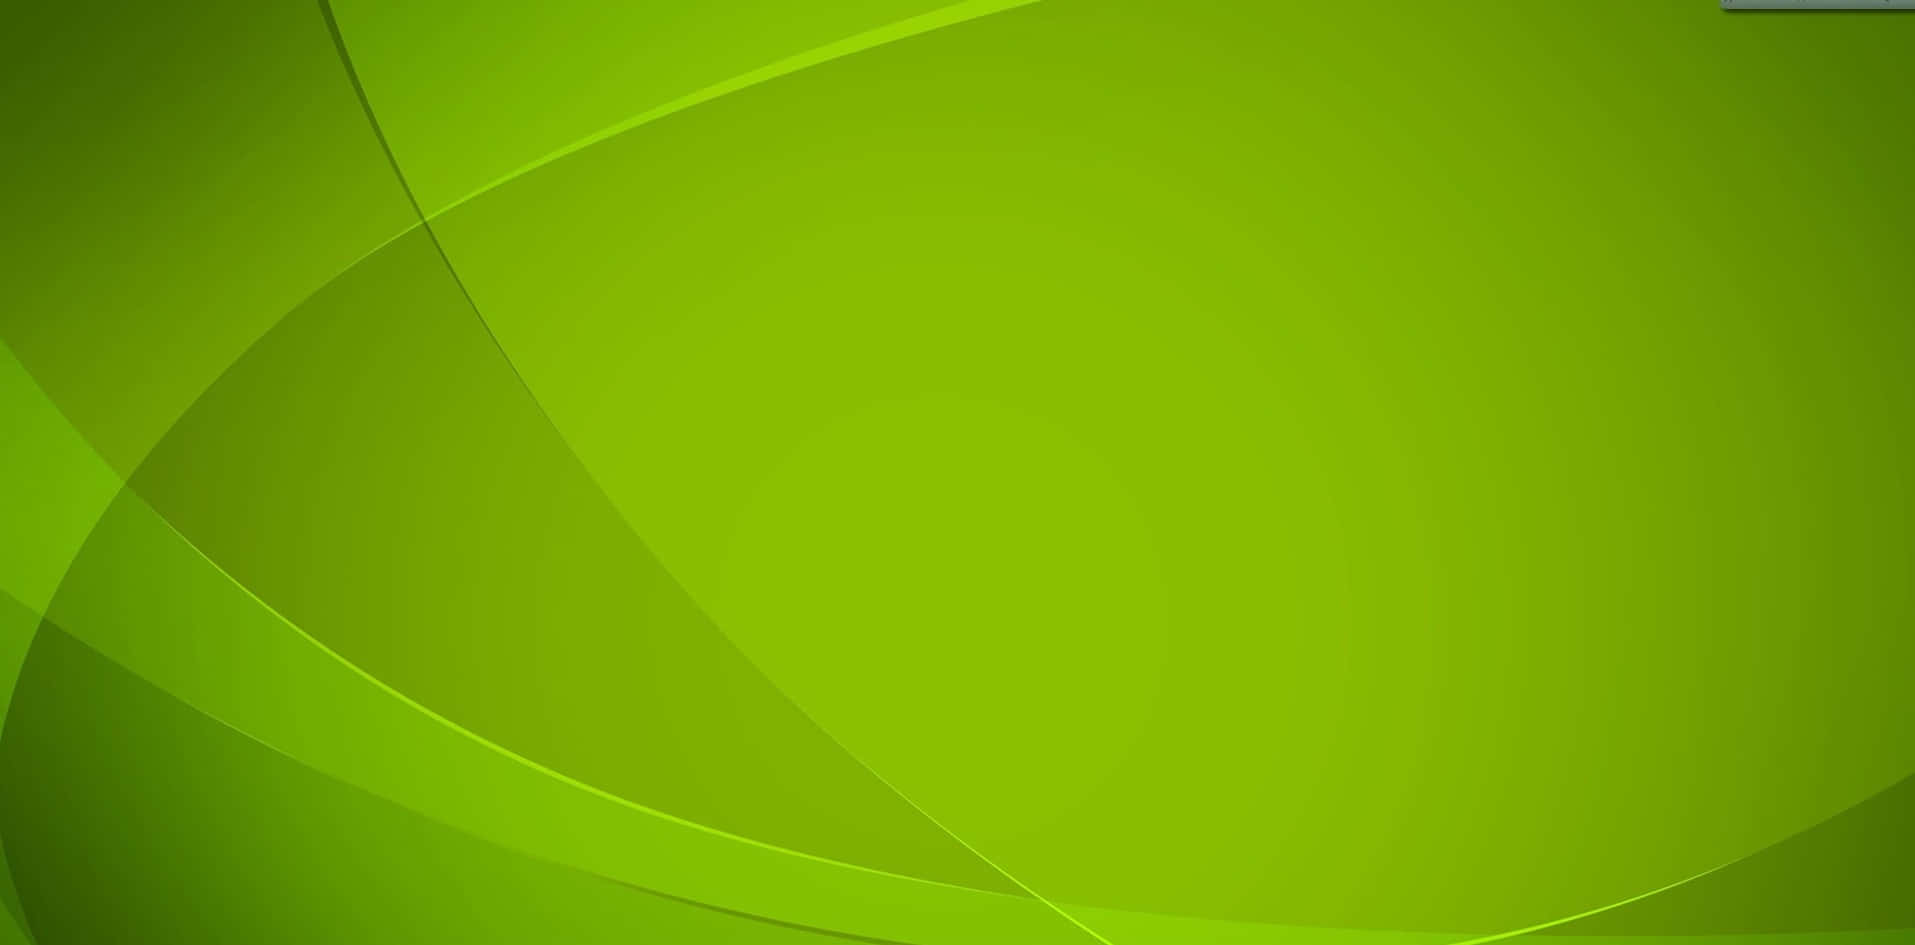 Striking Abstract Lime Green and Black Background